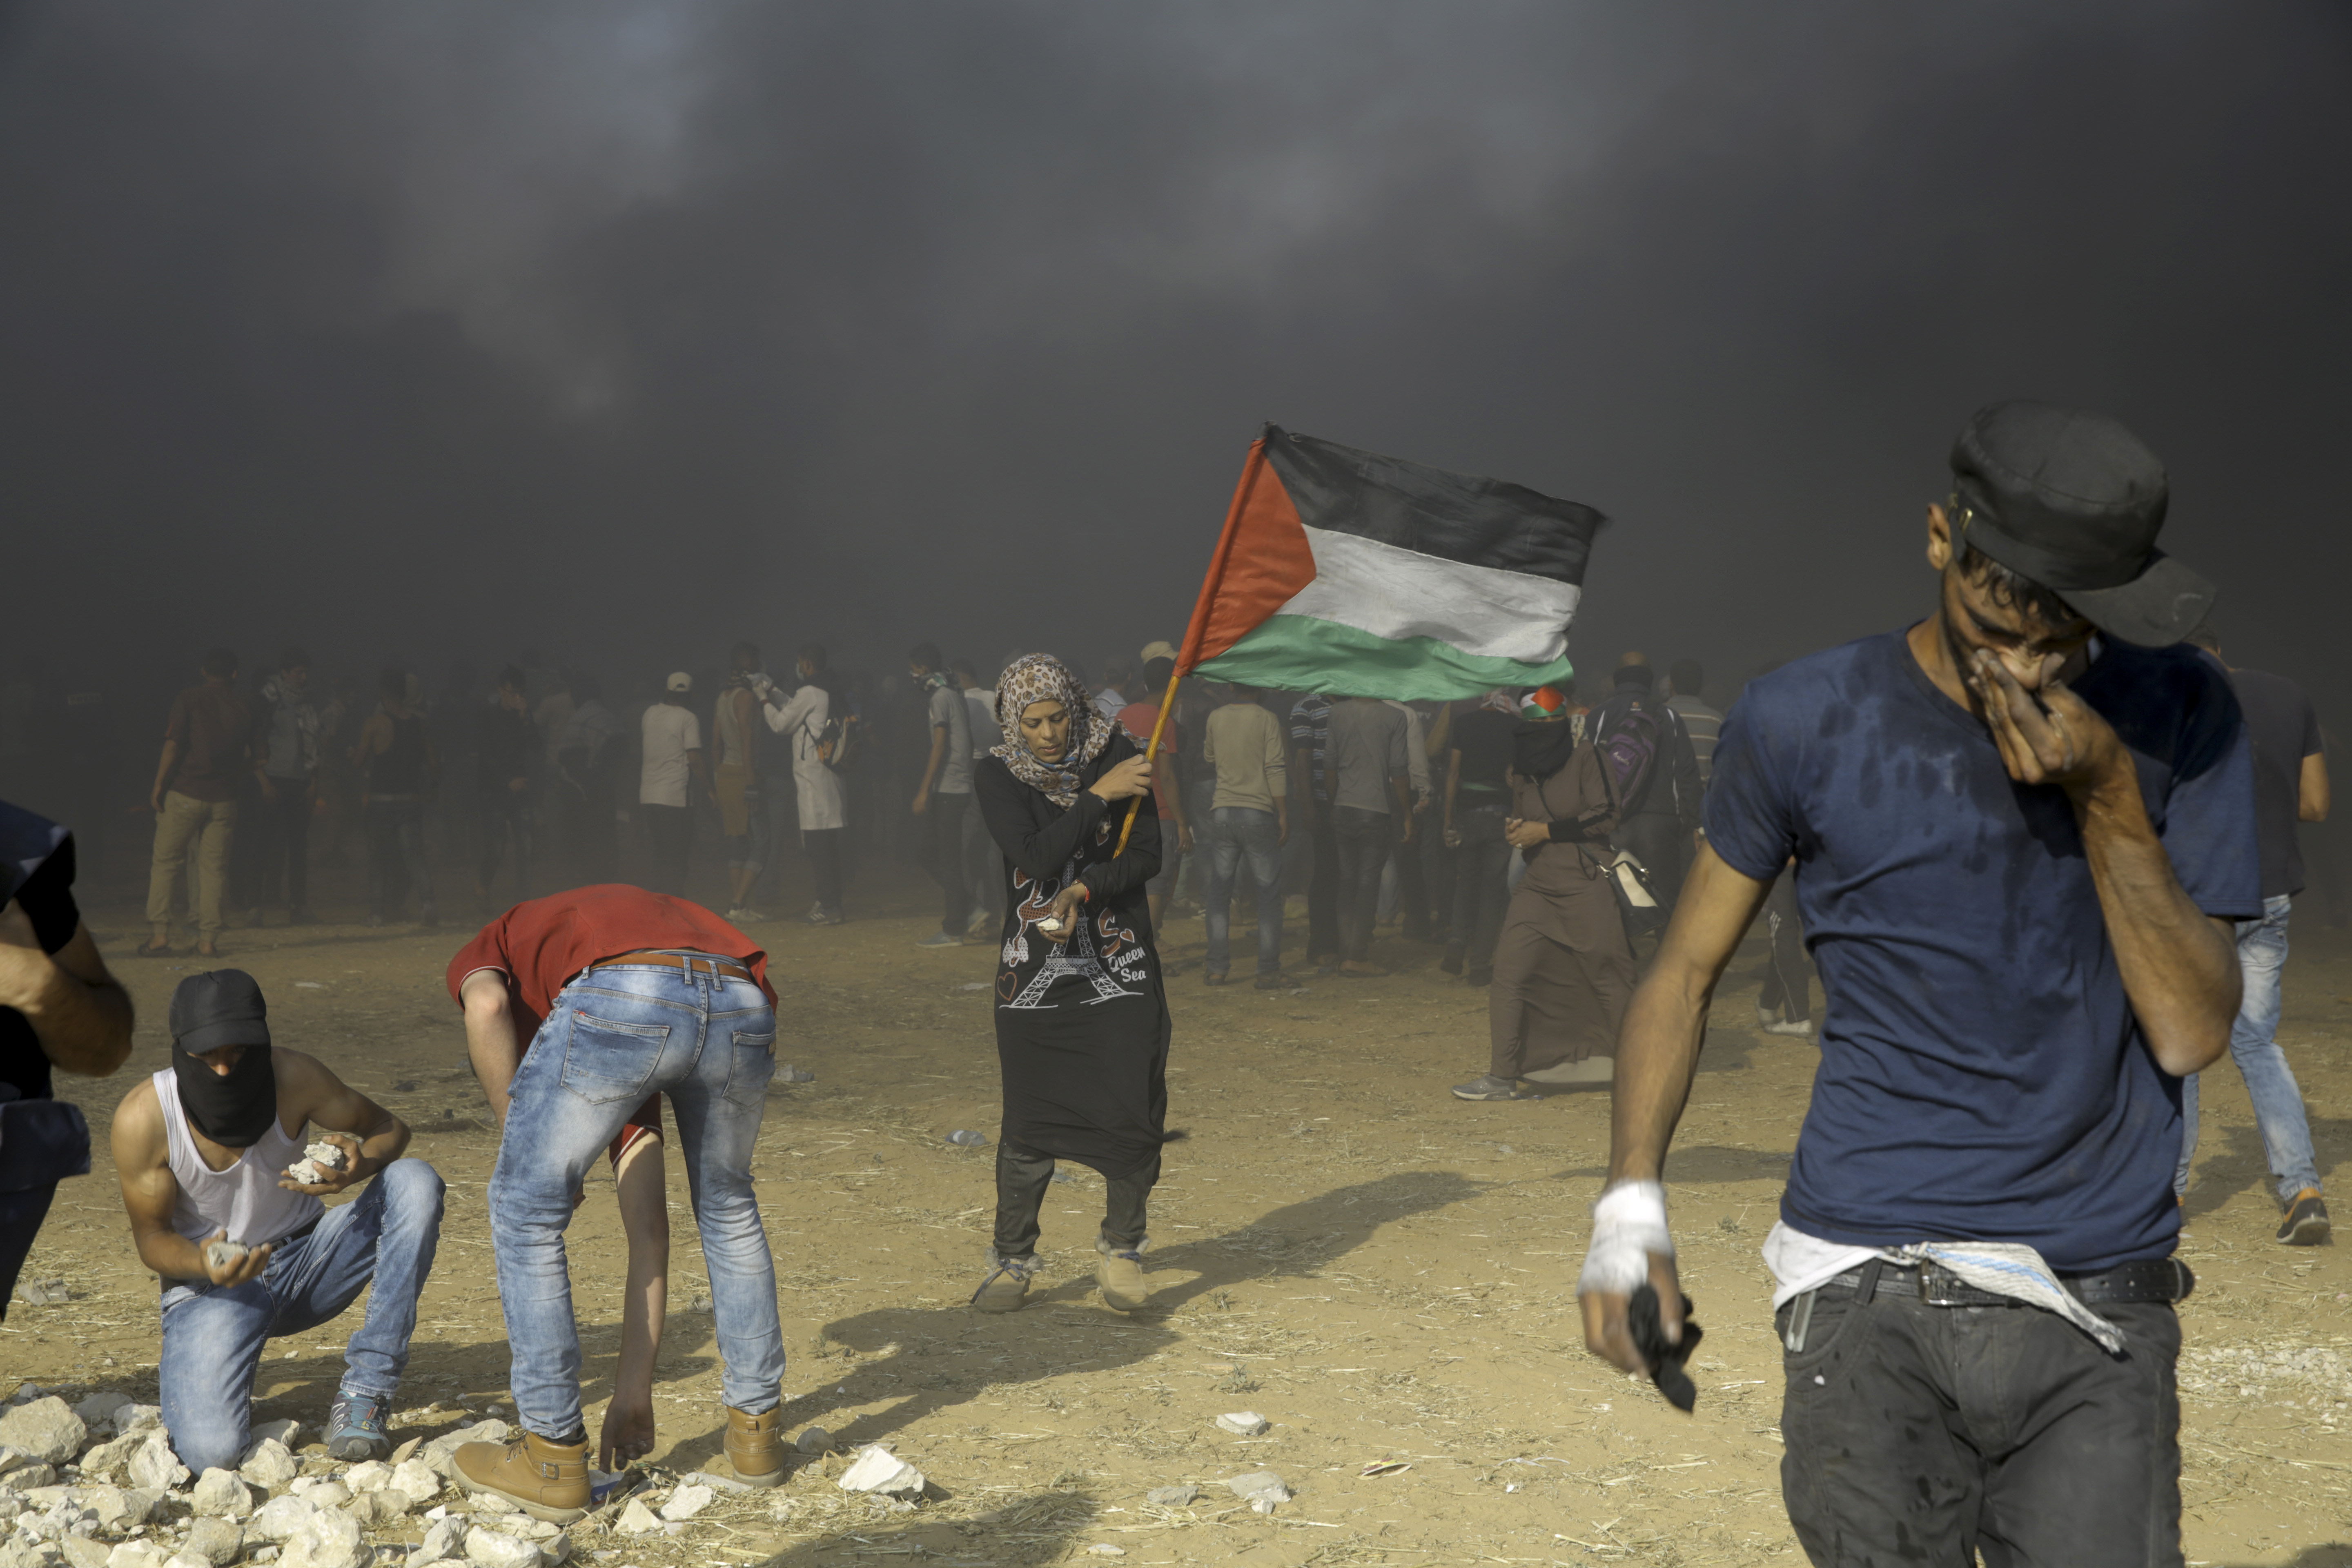 Palestinian woman waves national flag during a protest at the Gaza Strip's border with Israel, east of Khan Younis, Tuesday, May 15, 2018. Israel faced a growing backlash Tuesday and new charges of using excessive force, a day after Israeli troops firing from across a border fence killed dozens of Palestinians and wounded more than 2,700 at a mass protest in Gaza. (AP Photo/Adel Hana)